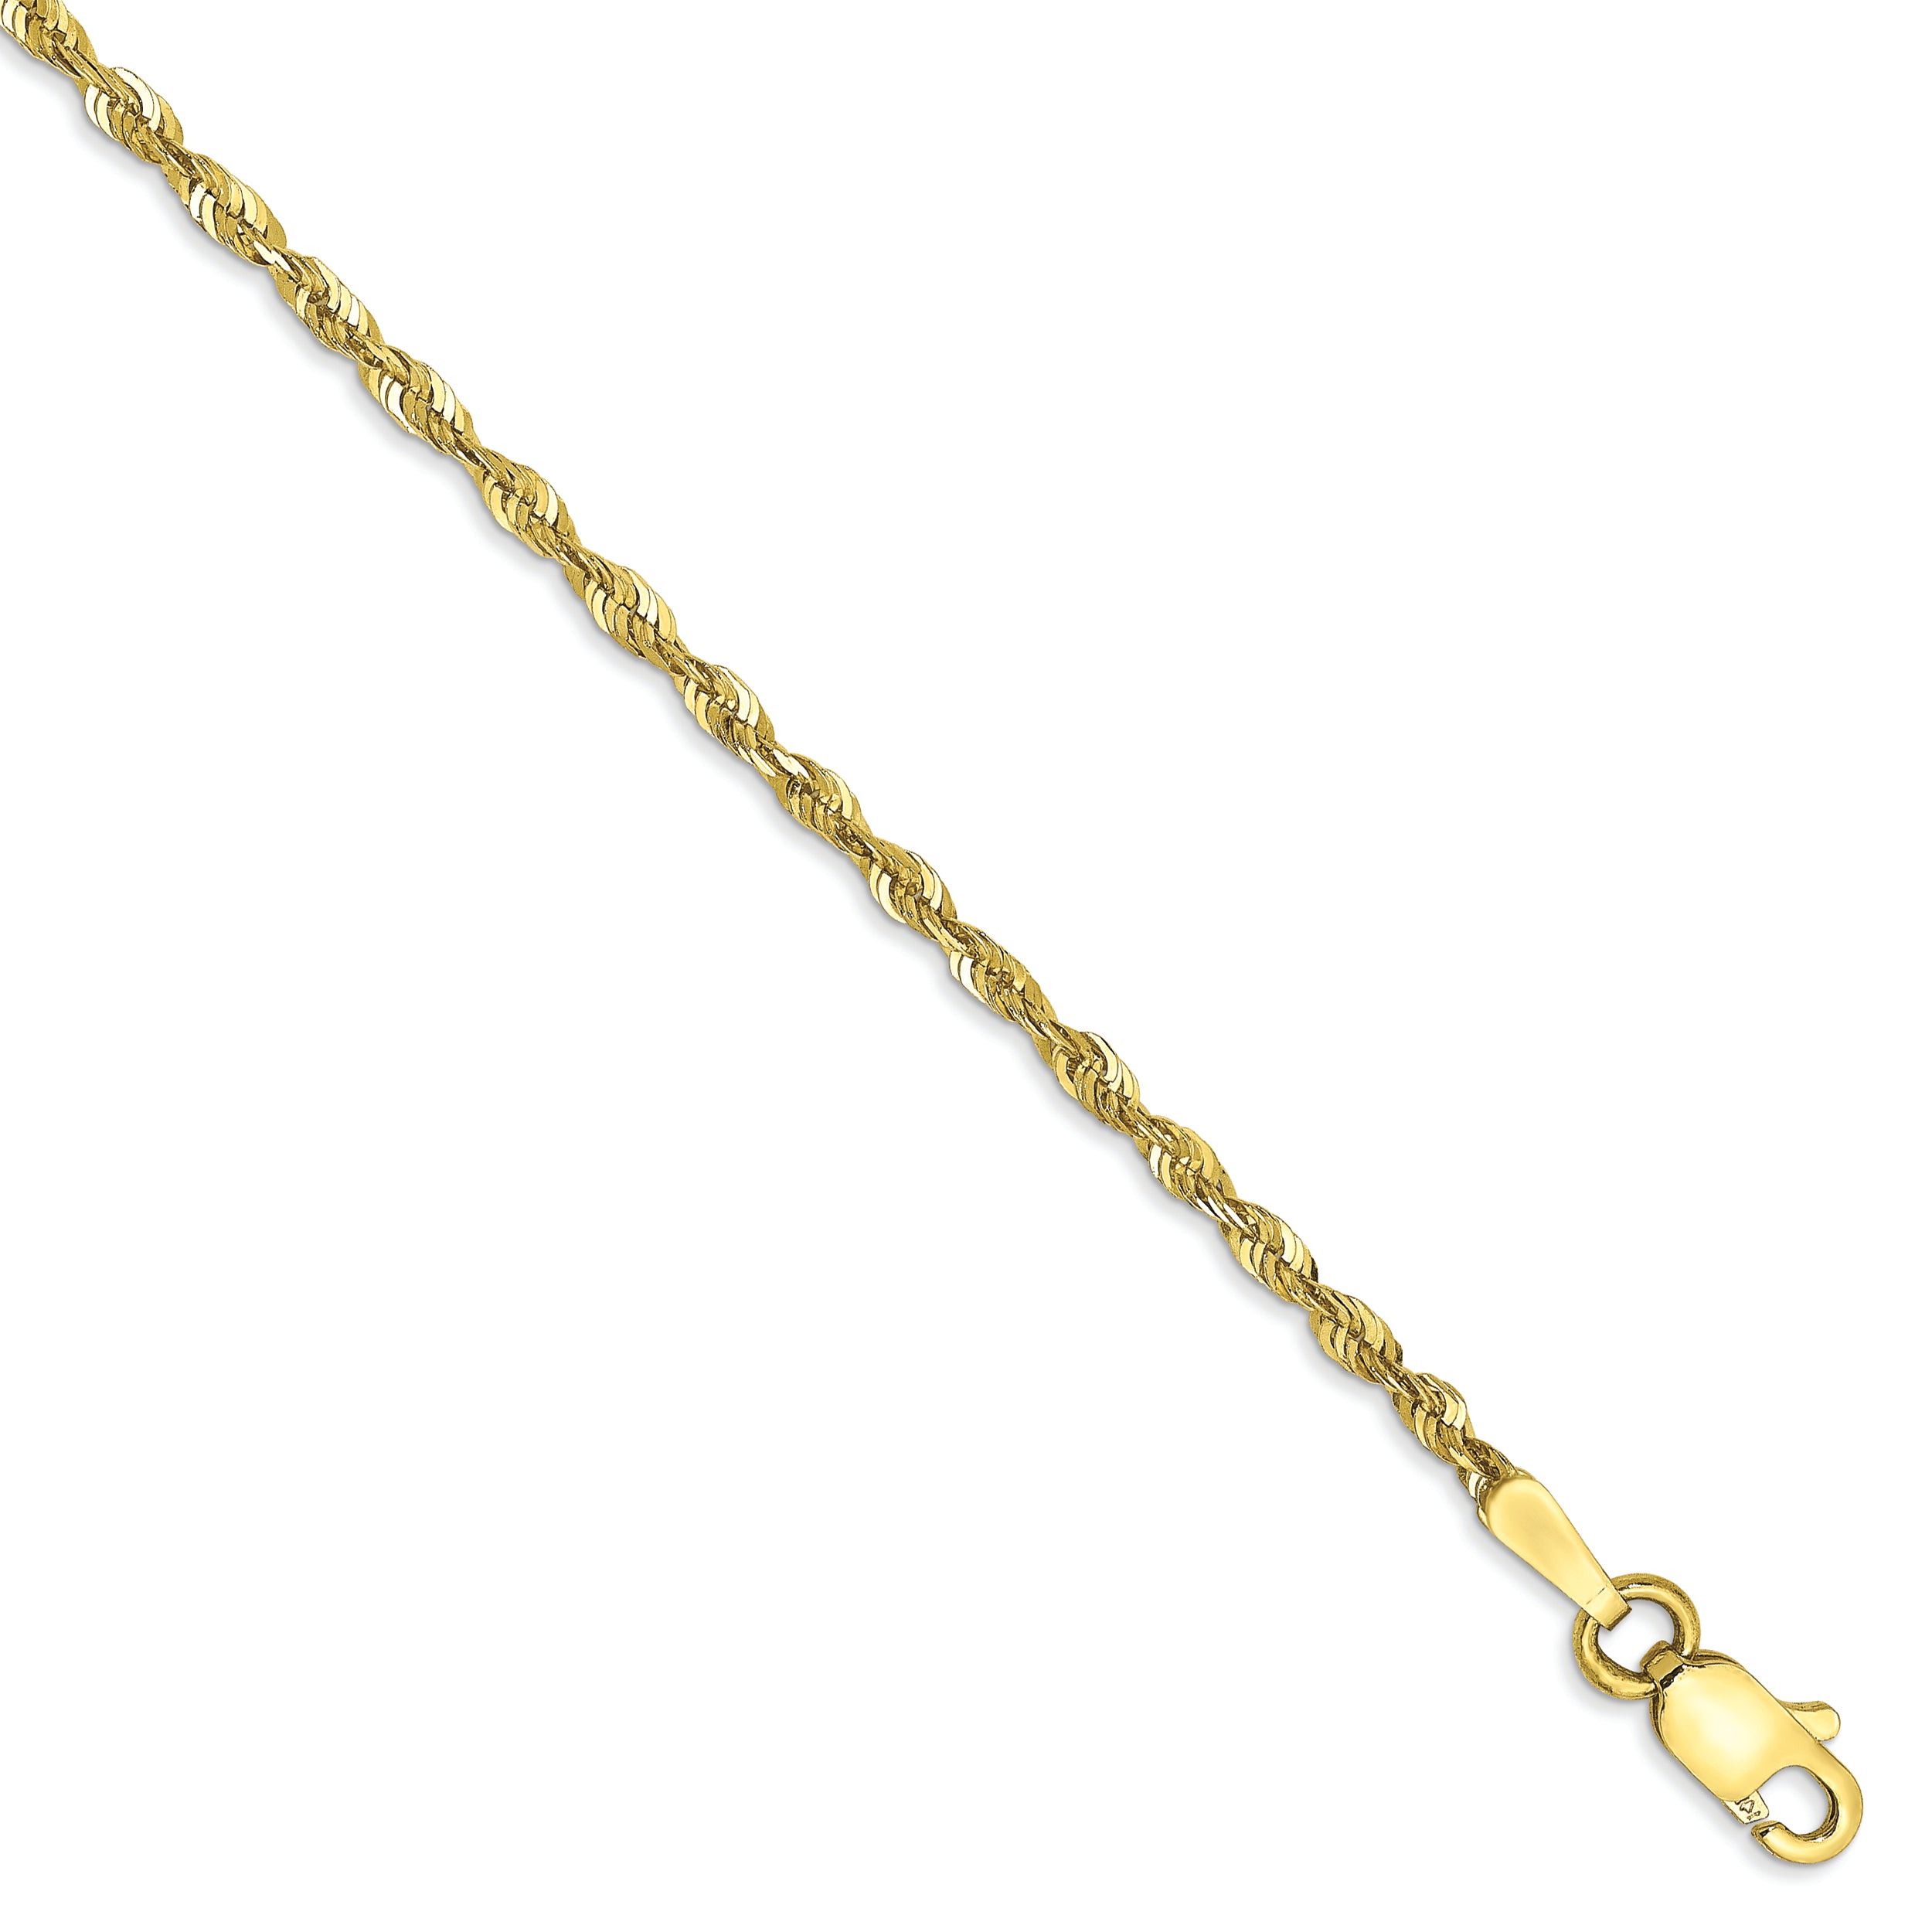 10k 1.8mm Extra-Light D/C Rope Chain Anklet